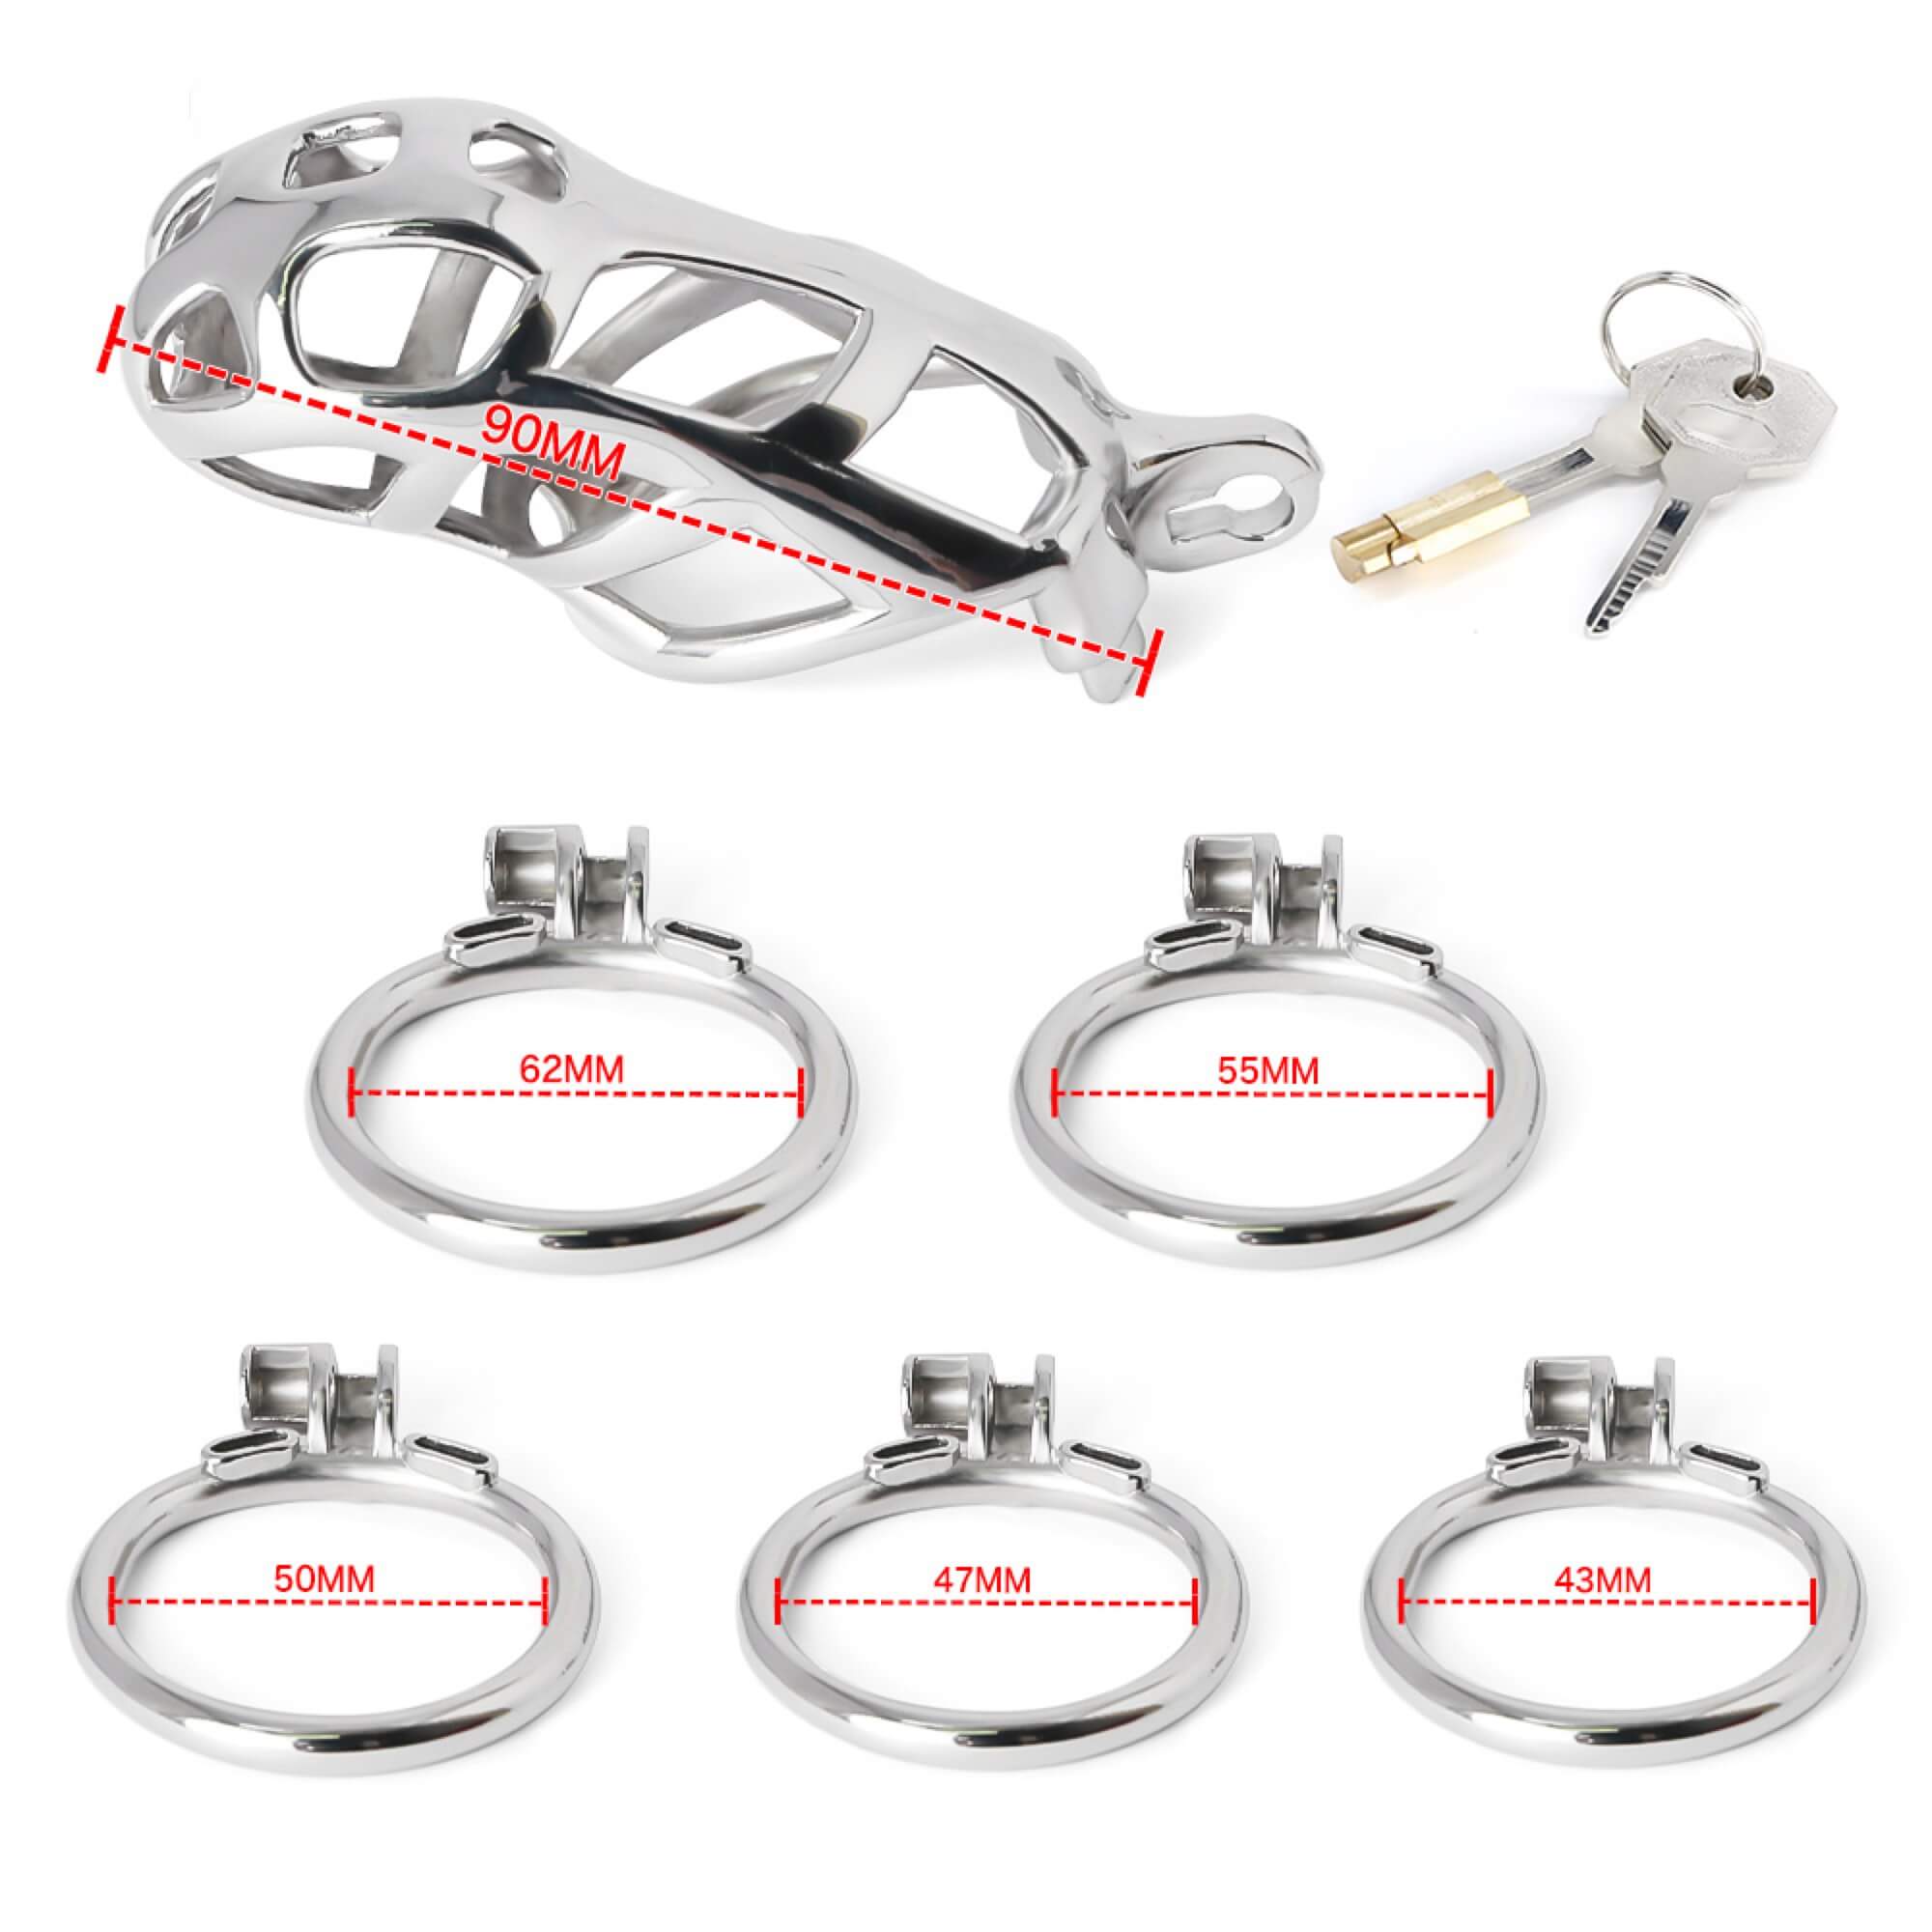 The Cub Stainless Steel Chastity Cage